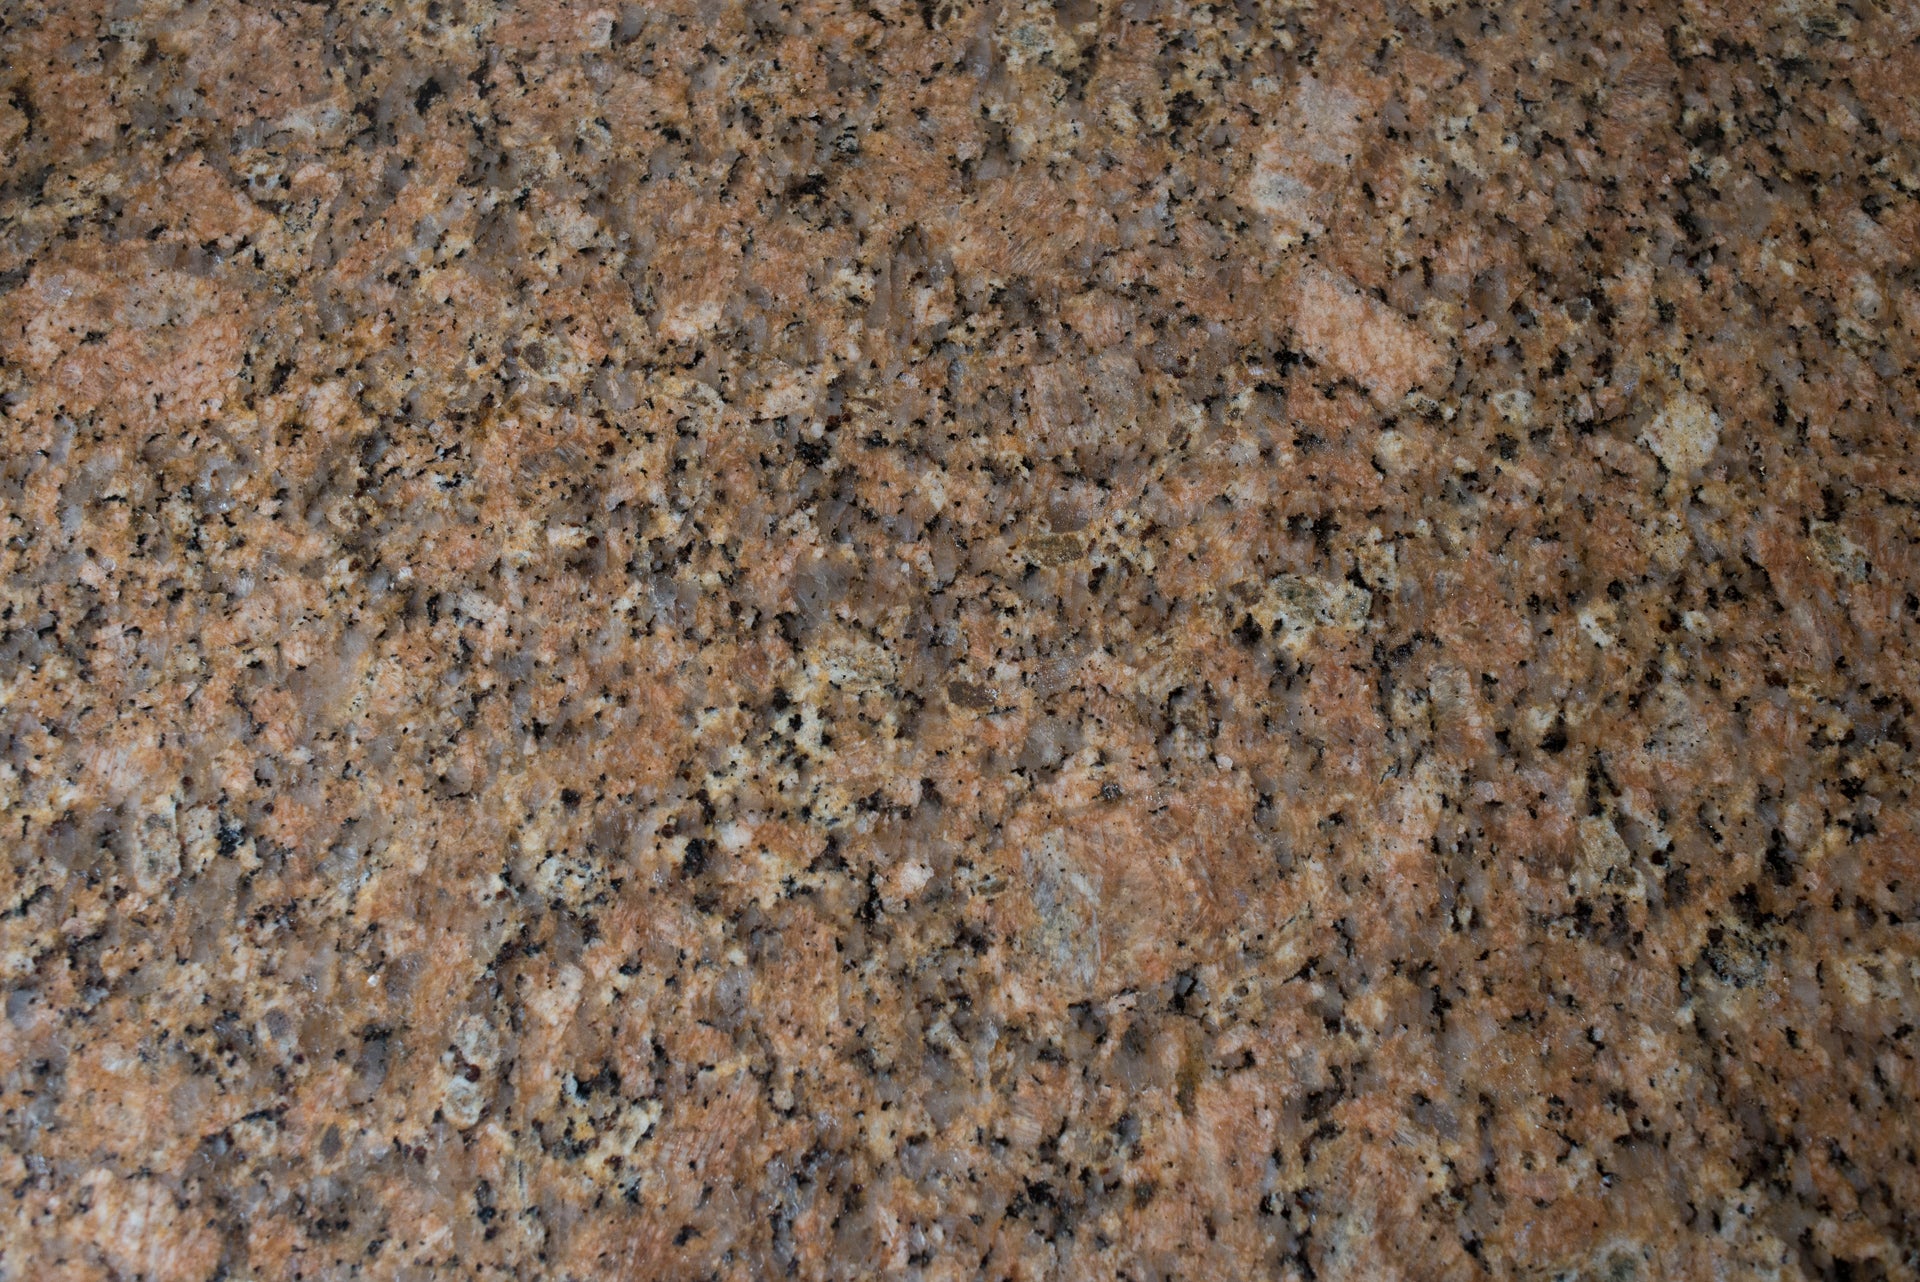 Close-up of textured granite countertop surface.